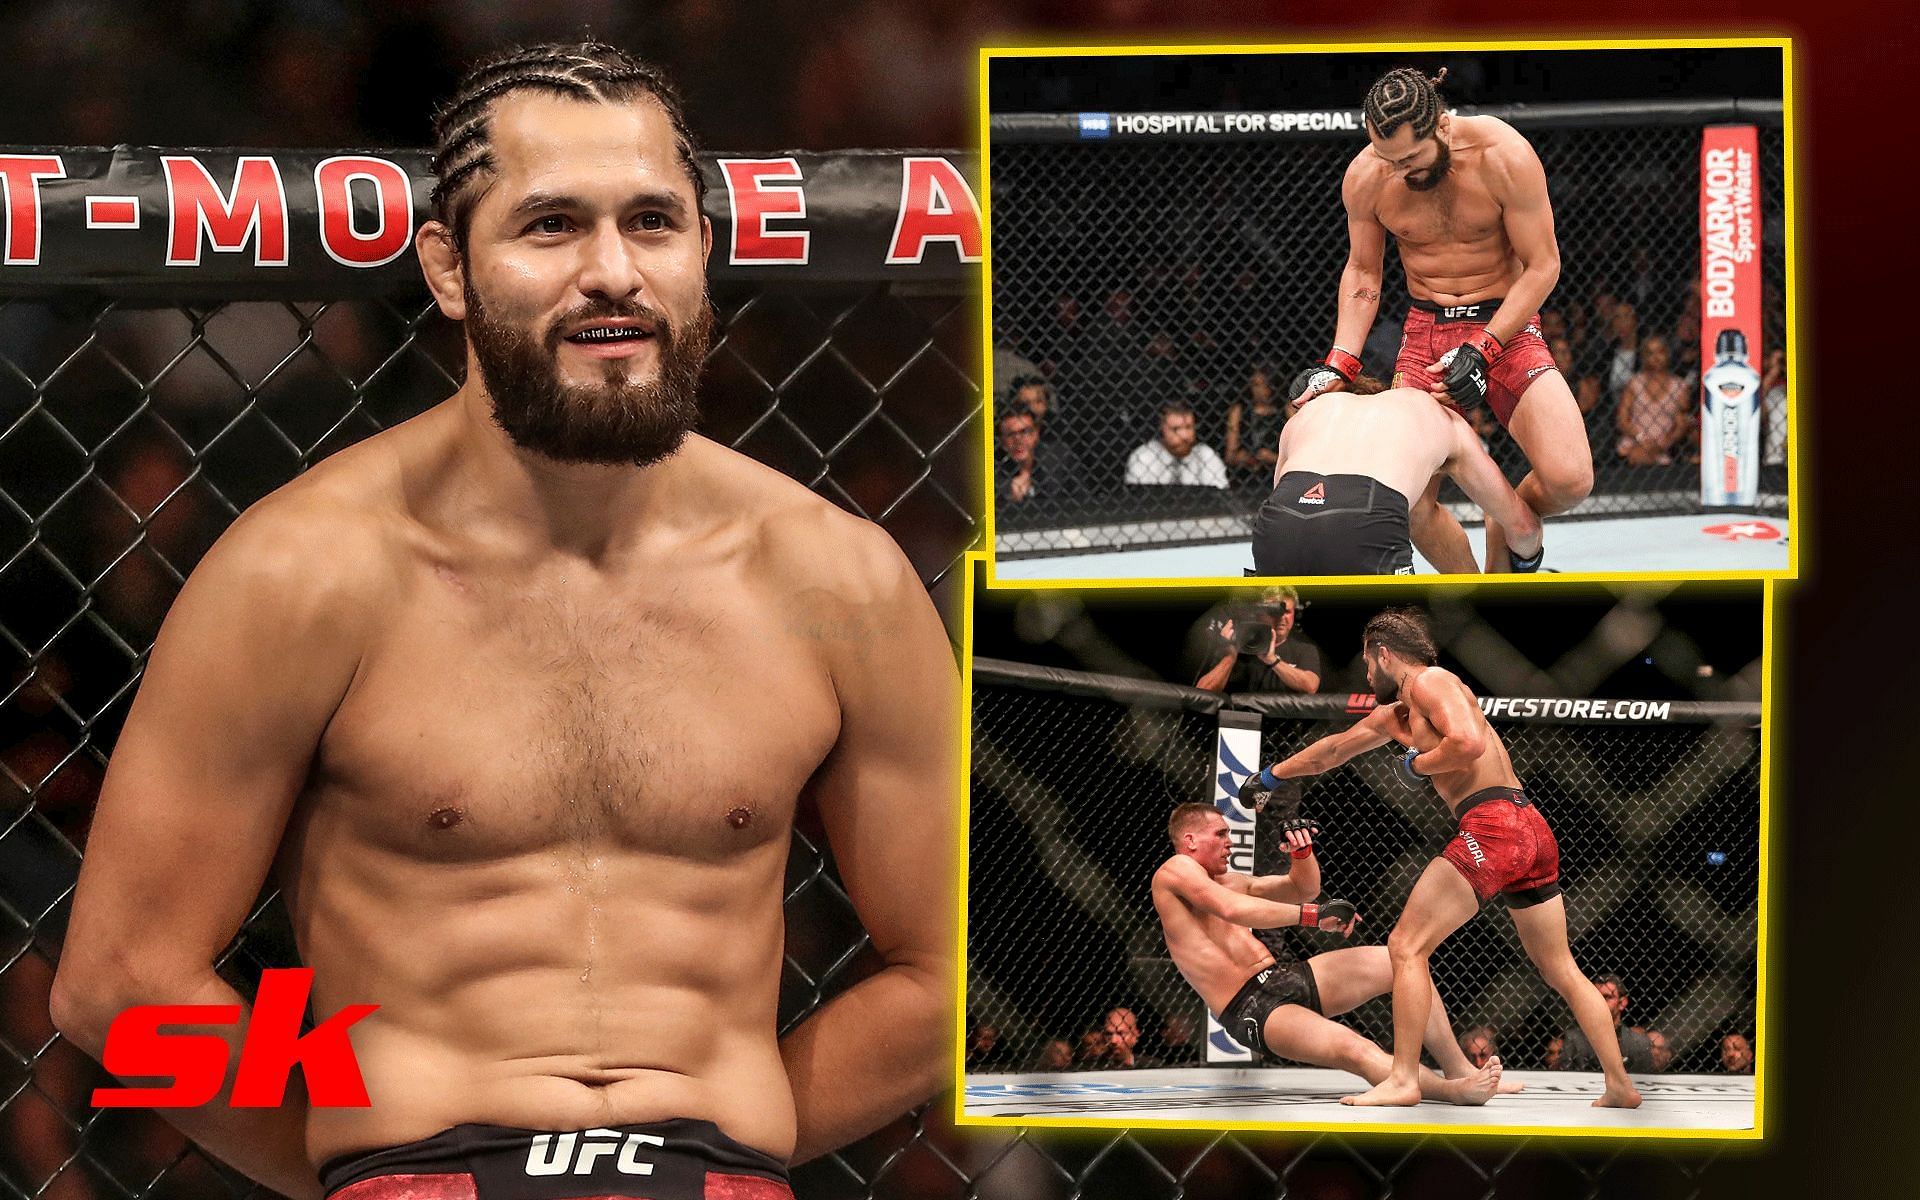 Jorge Masvidal retires from MMA [Images via: @newsoneplace on Twitter]